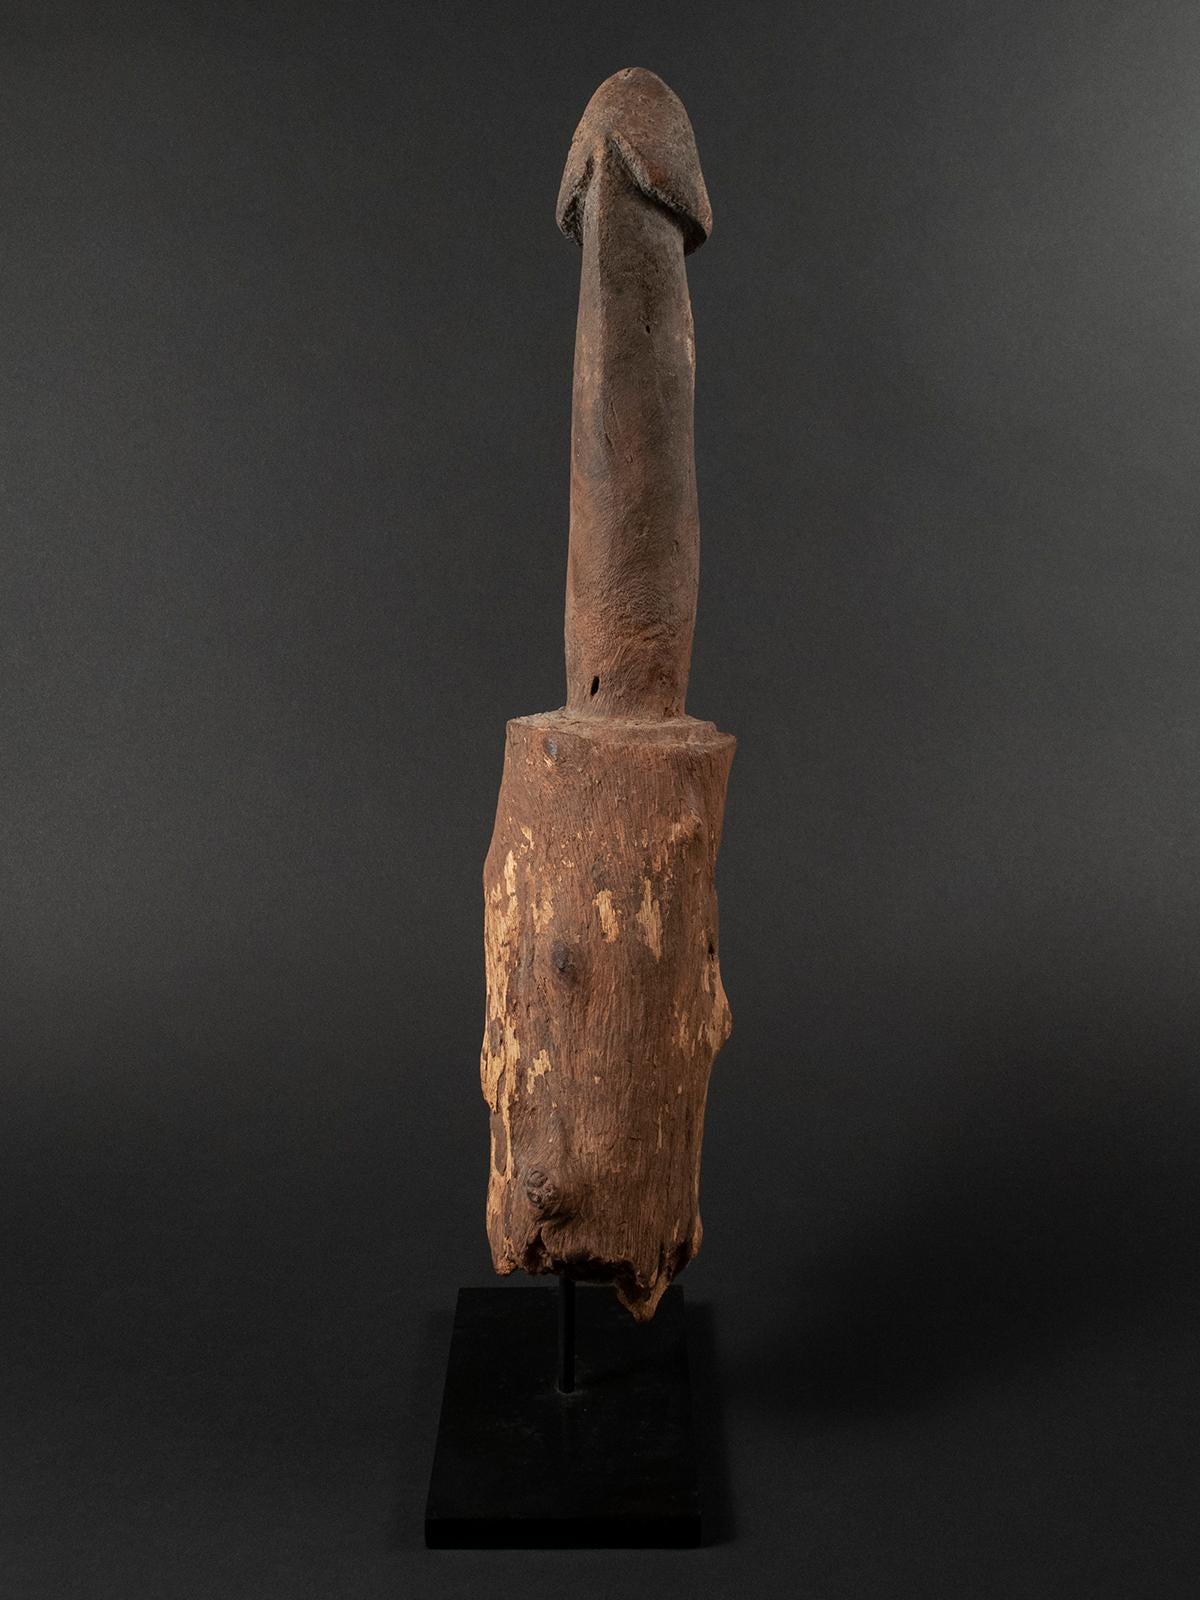 Togolese Late 19th-Early 20th Century Wood Legba Phallus, Fon People, West Africa